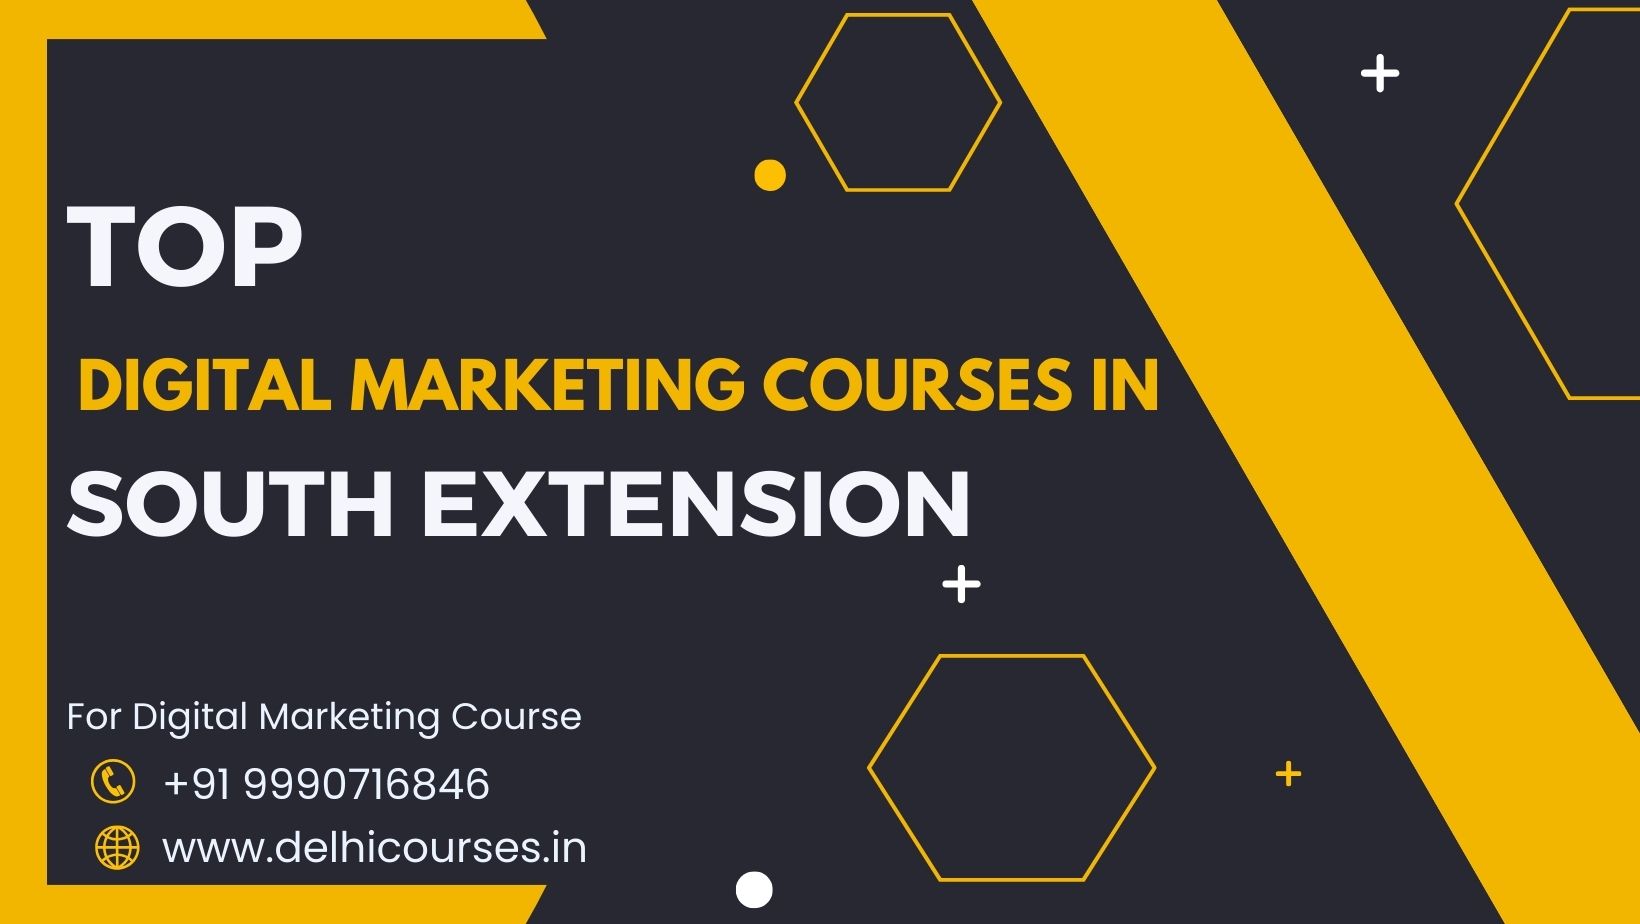 Digital Marketing Courses in South Extension